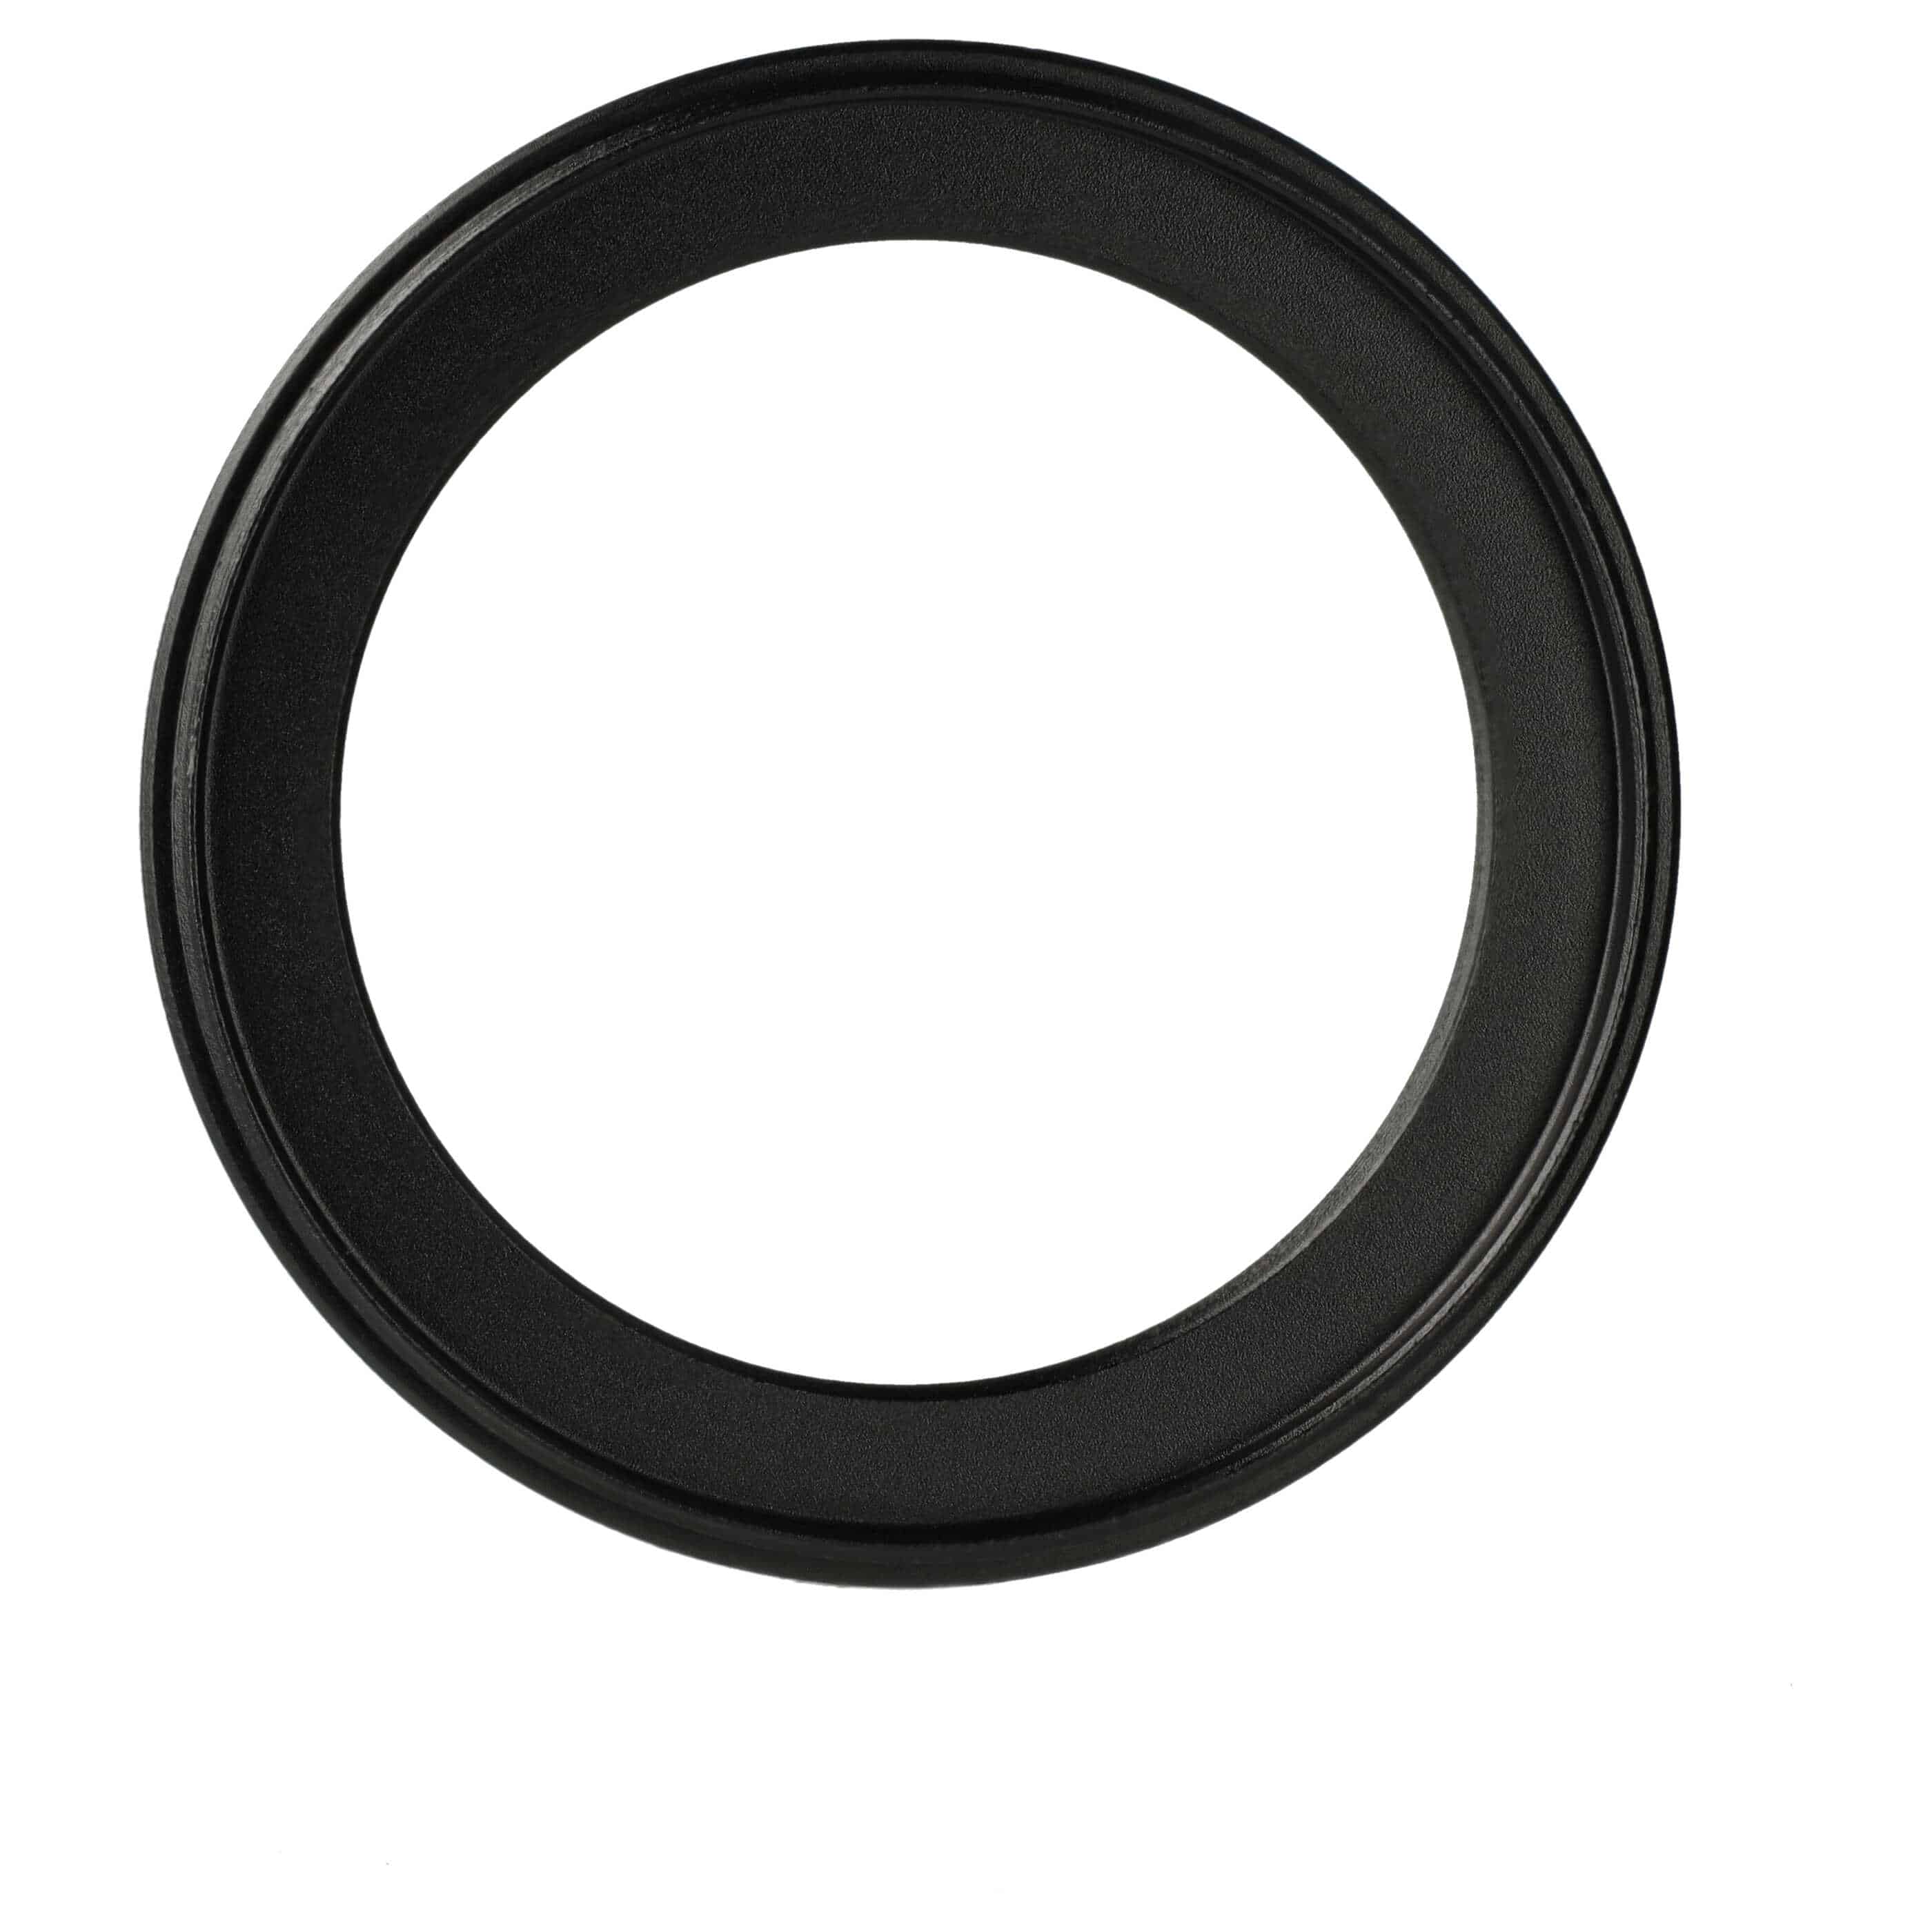 Step-Down Ring Adapter from 67 mm to 52 mm for various Camera Lenses